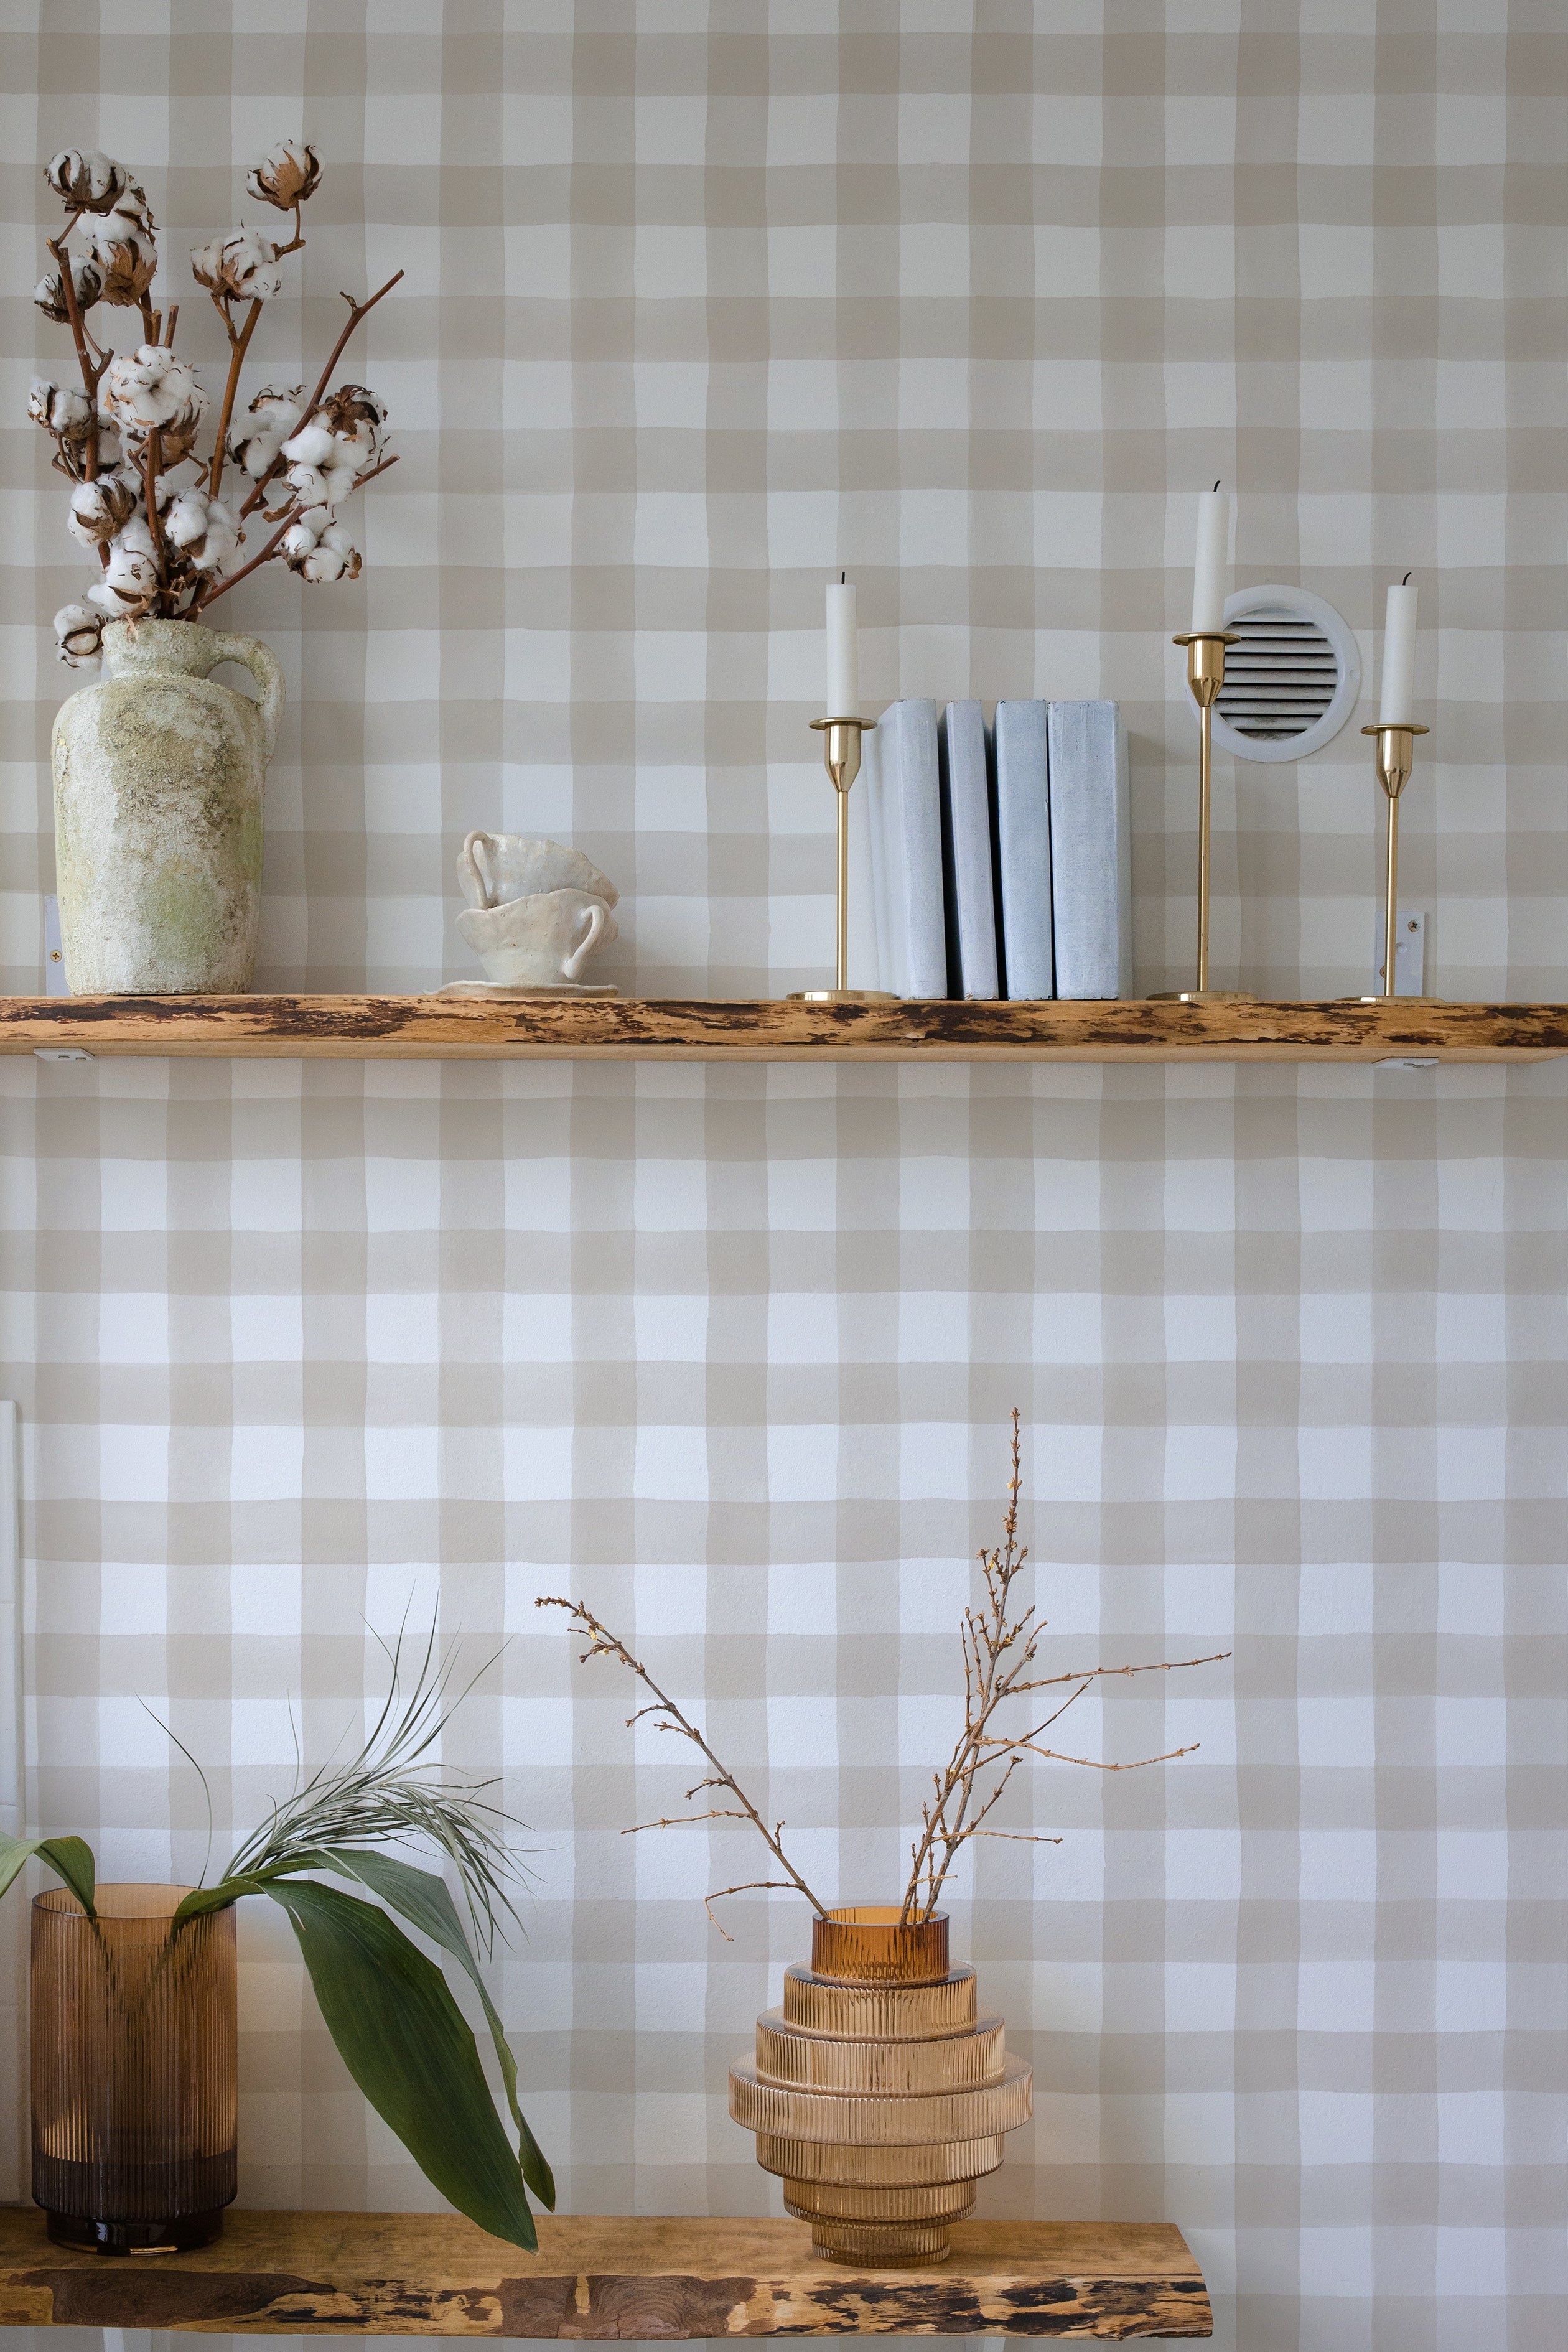 A rustic home decor scene with a wall adorned in beige and white buffalo check wallpaper. The scene includes a wooden shelf with a vase holding cotton branches, a ceramic cup, and modern candle holders, providing a warm and natural atmosphere.